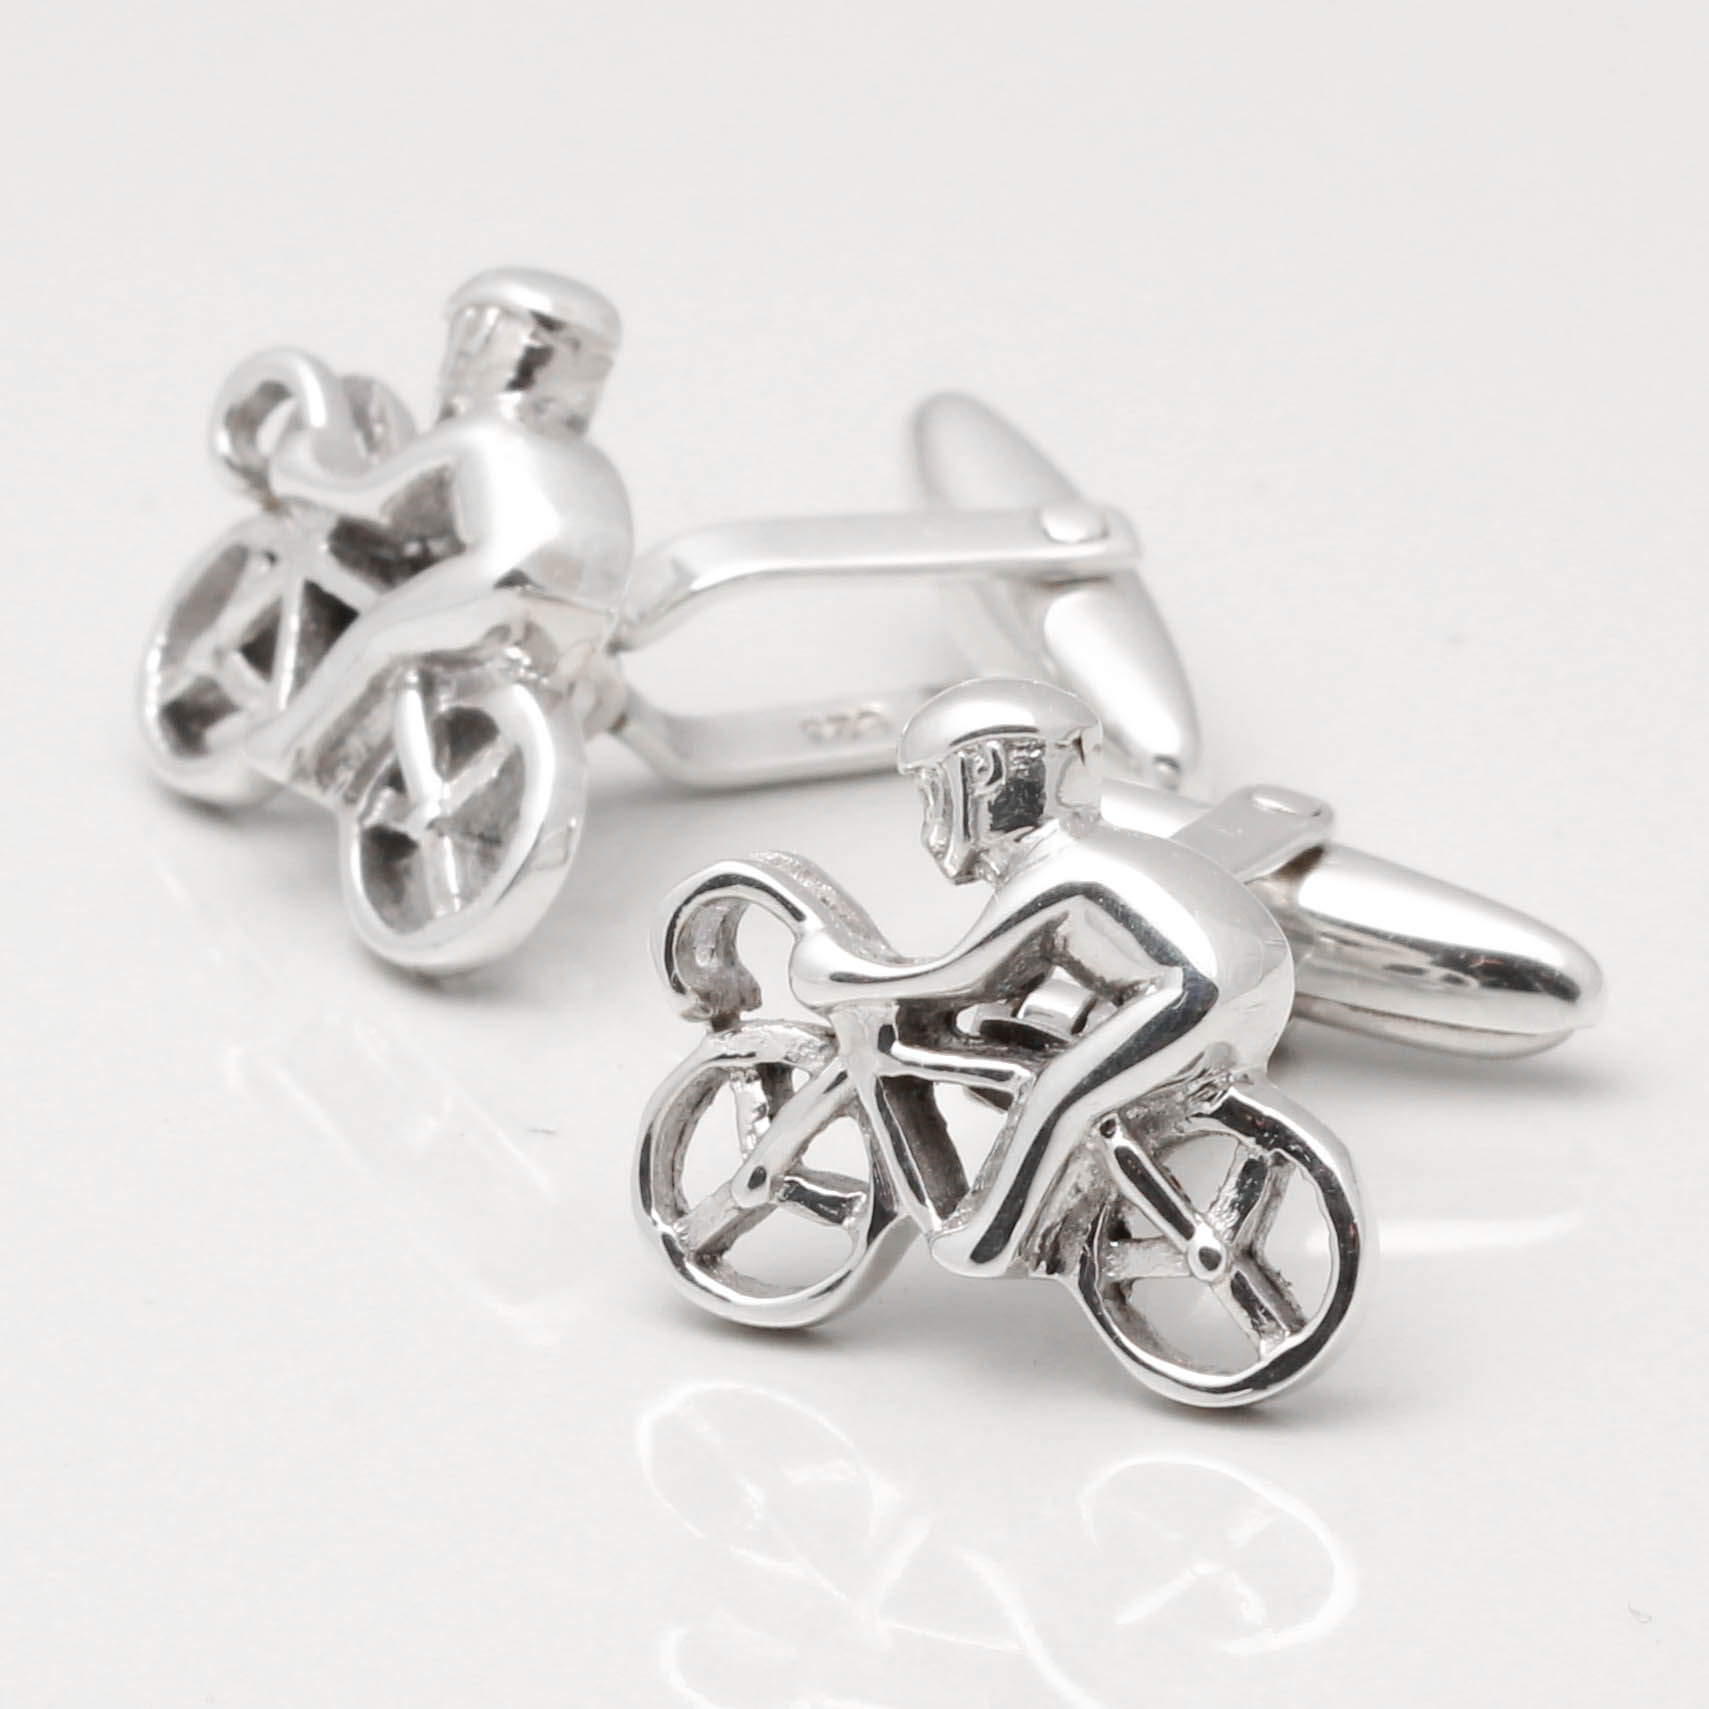 Details about  / Silver Cyclist Bicycle Cuff Links Men Novelty Cufflink Father Day Gift UK SELLER